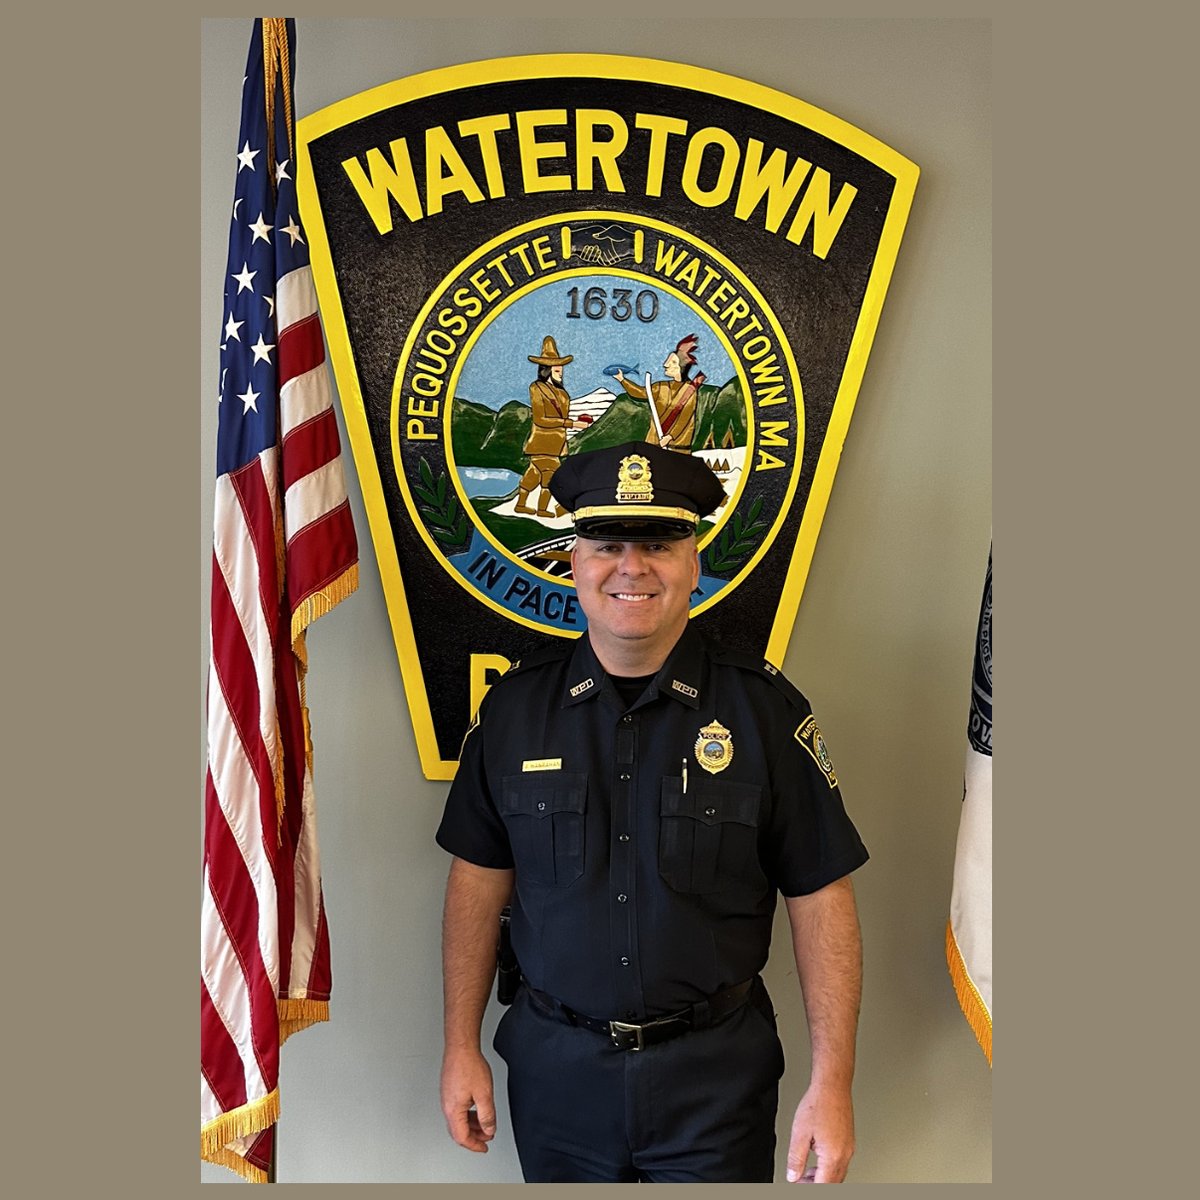 City Manager George J. Proakis is pleased to announce the appointment of Watertown native Justin Hanrahan as the new Police Chief for the City of Watertown effective November 30, 2023. Read more at watertown-ma.gov > News